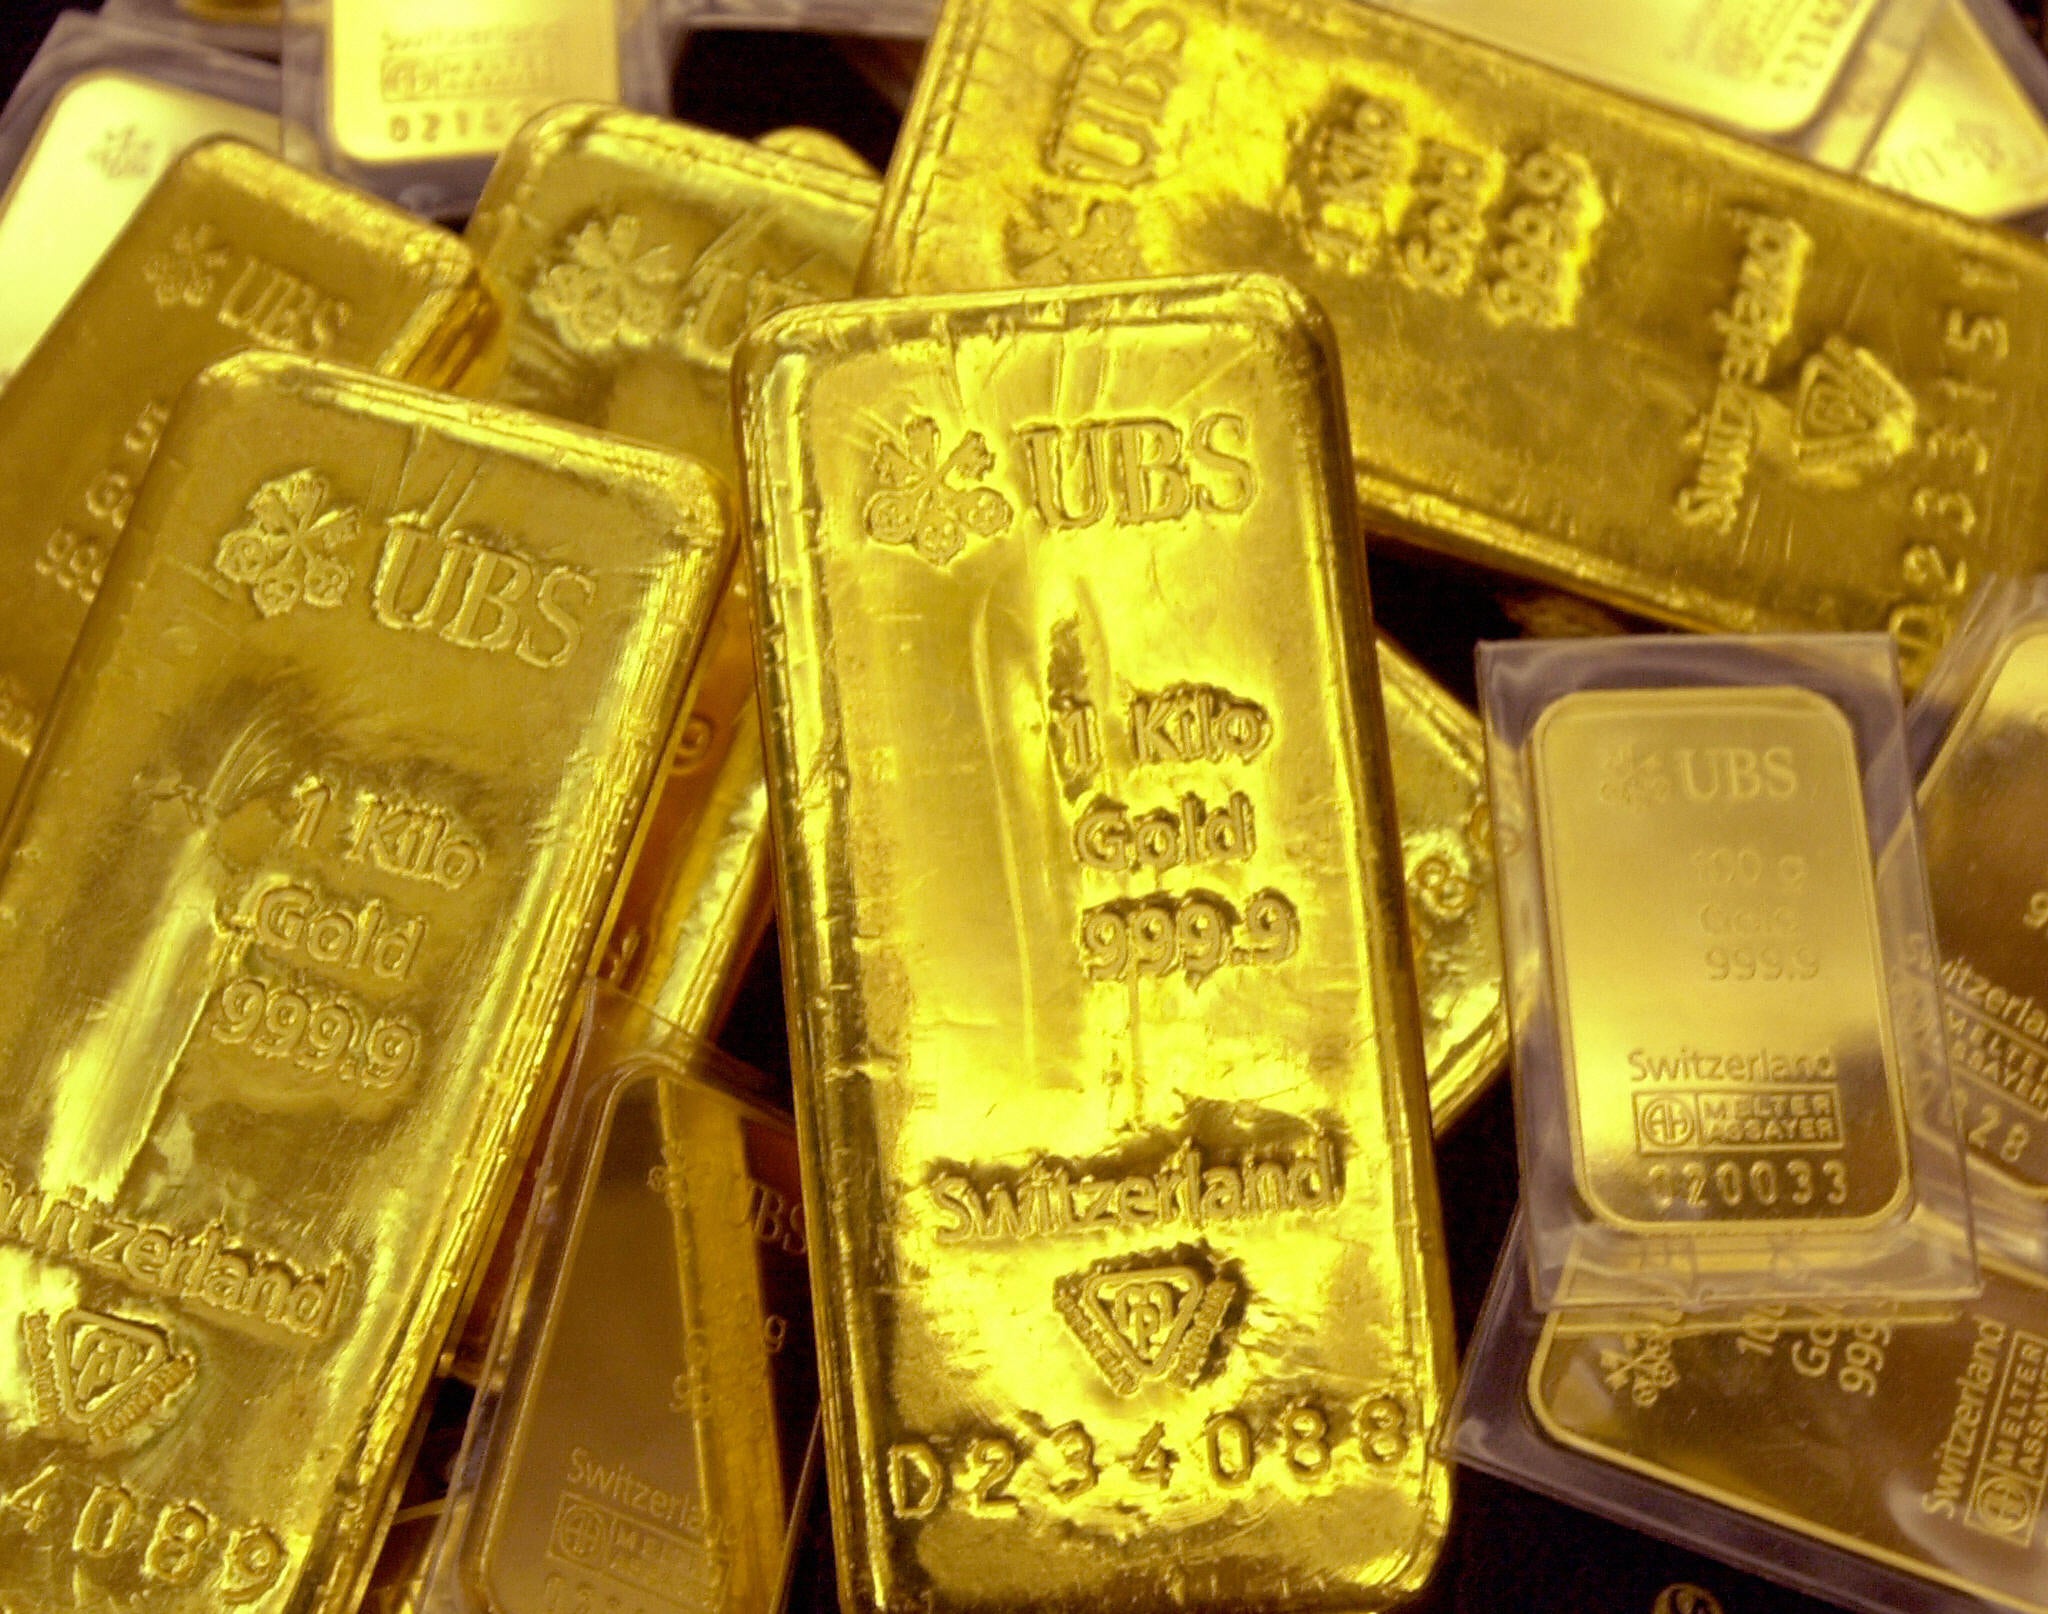 Demand continues for the rather odd tradition of gold pricing